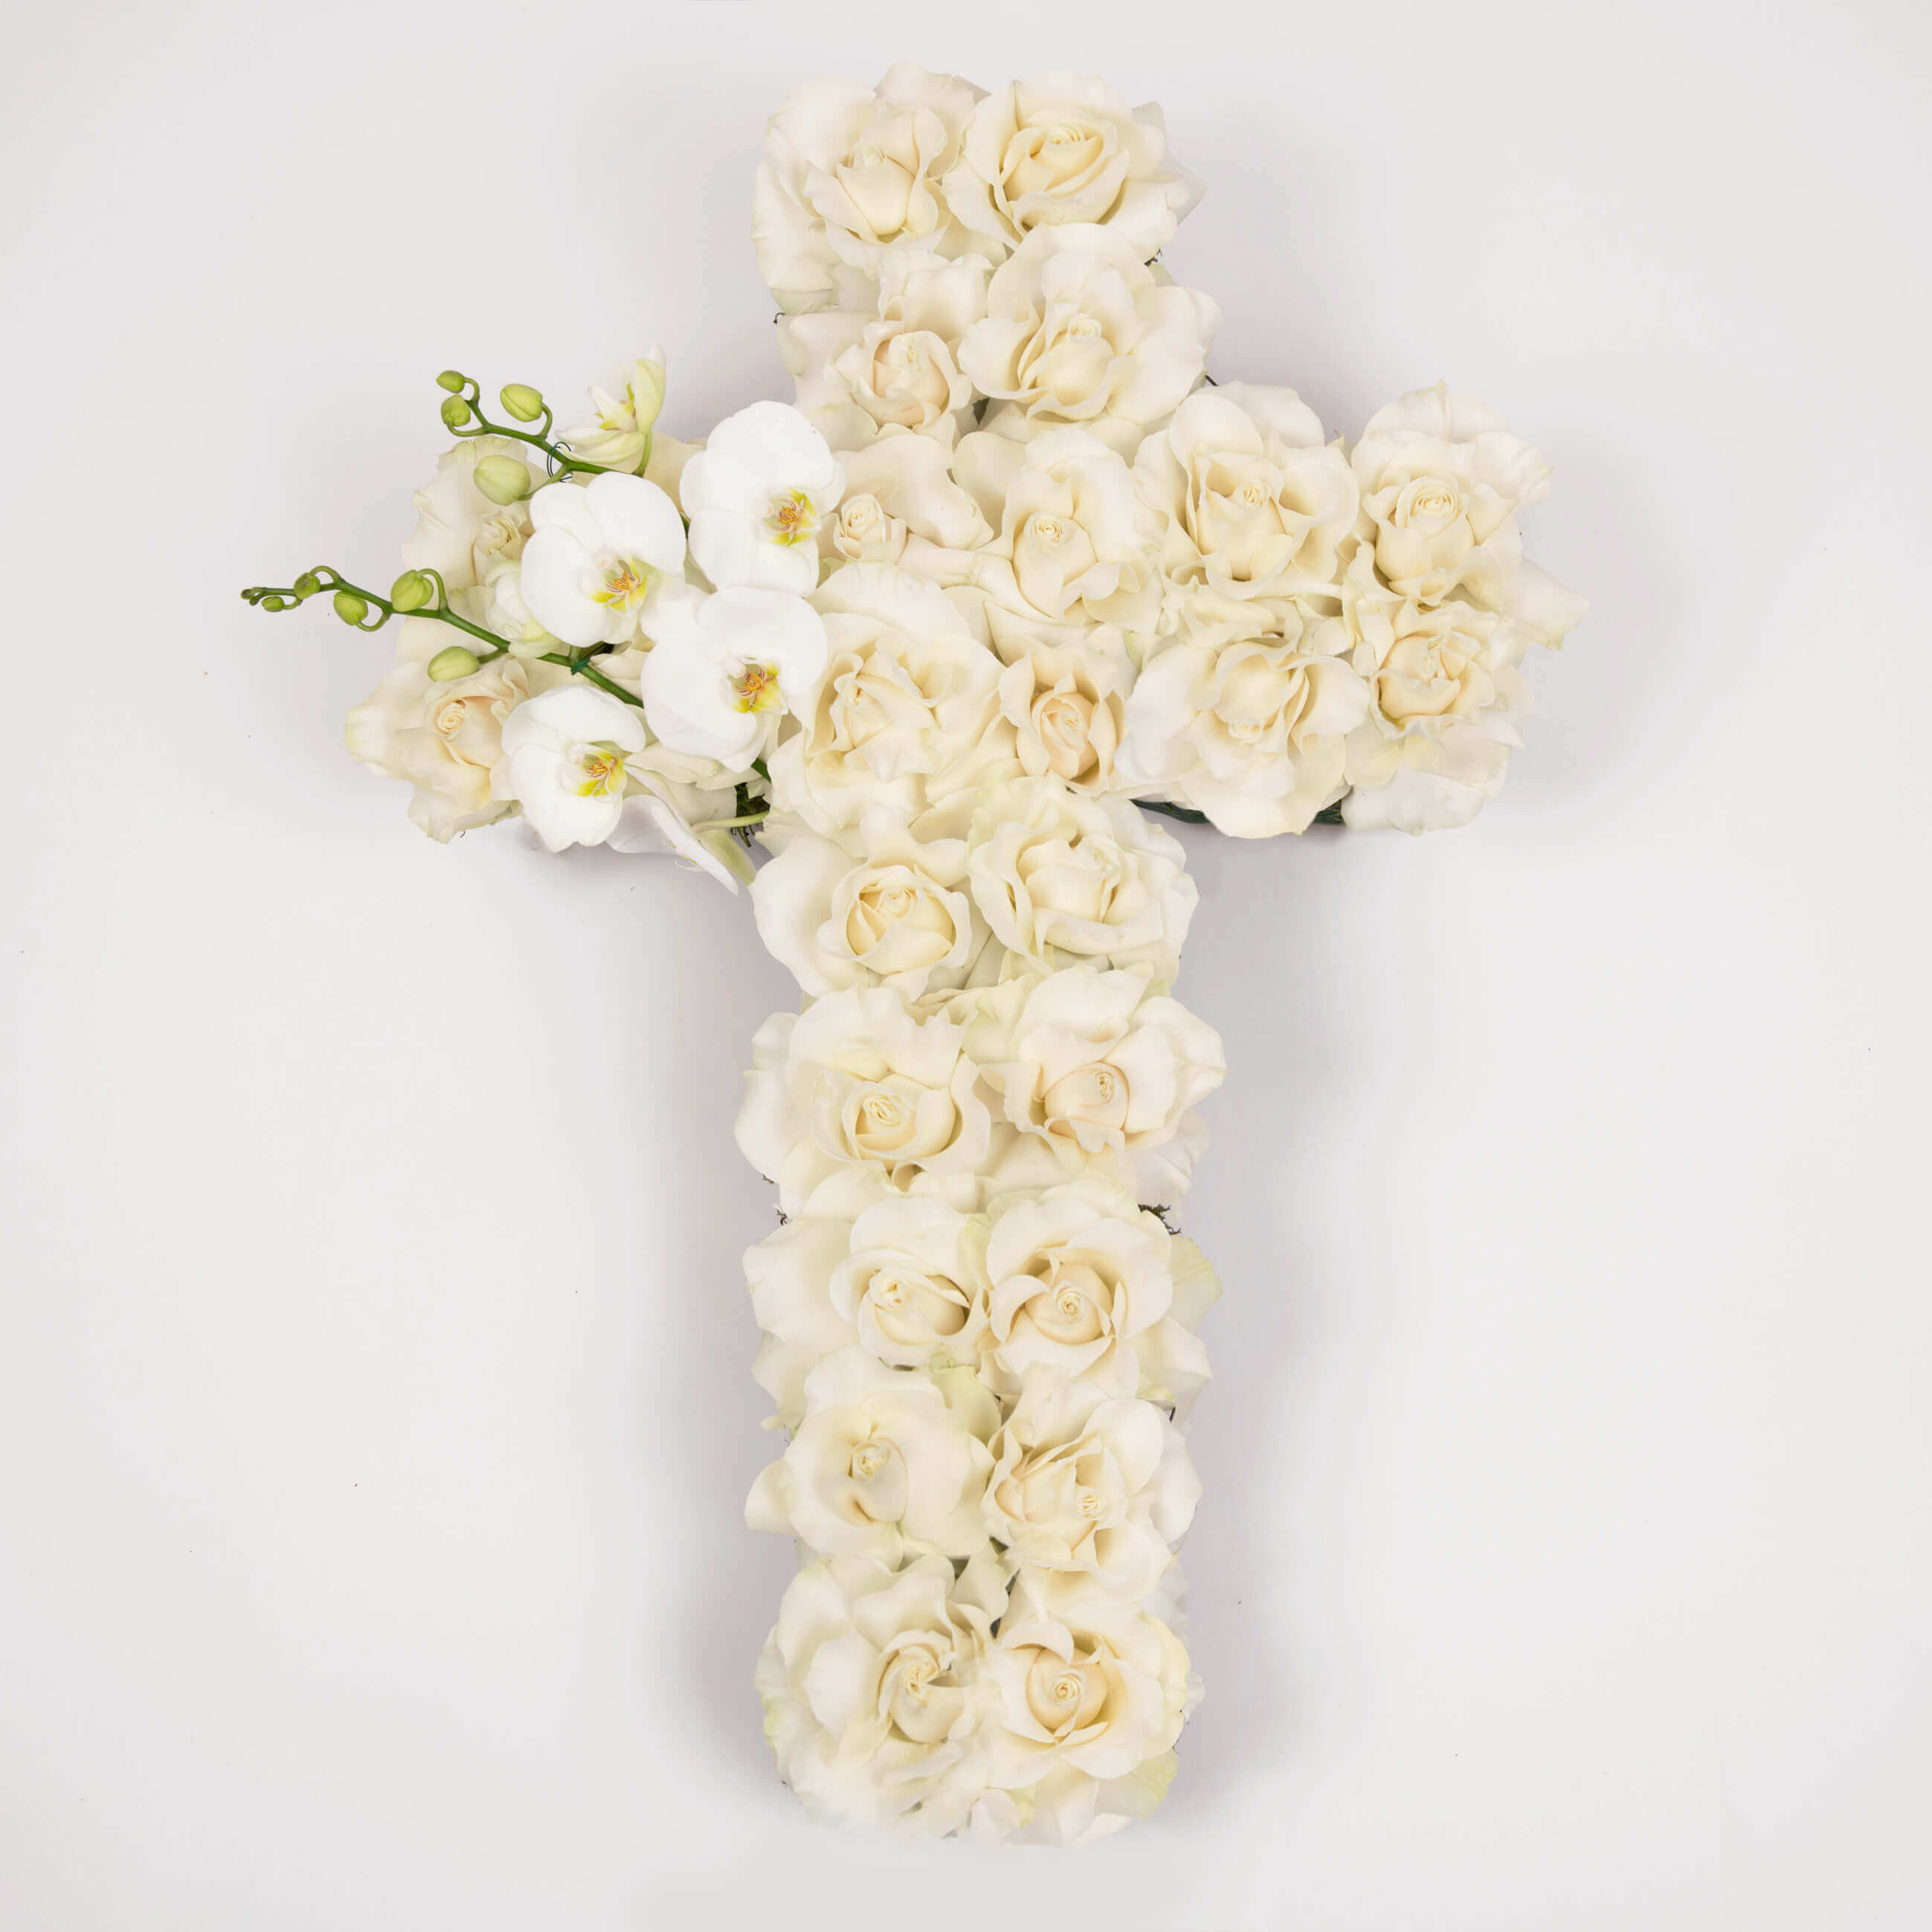 Cross with white roses and phalaenopsis